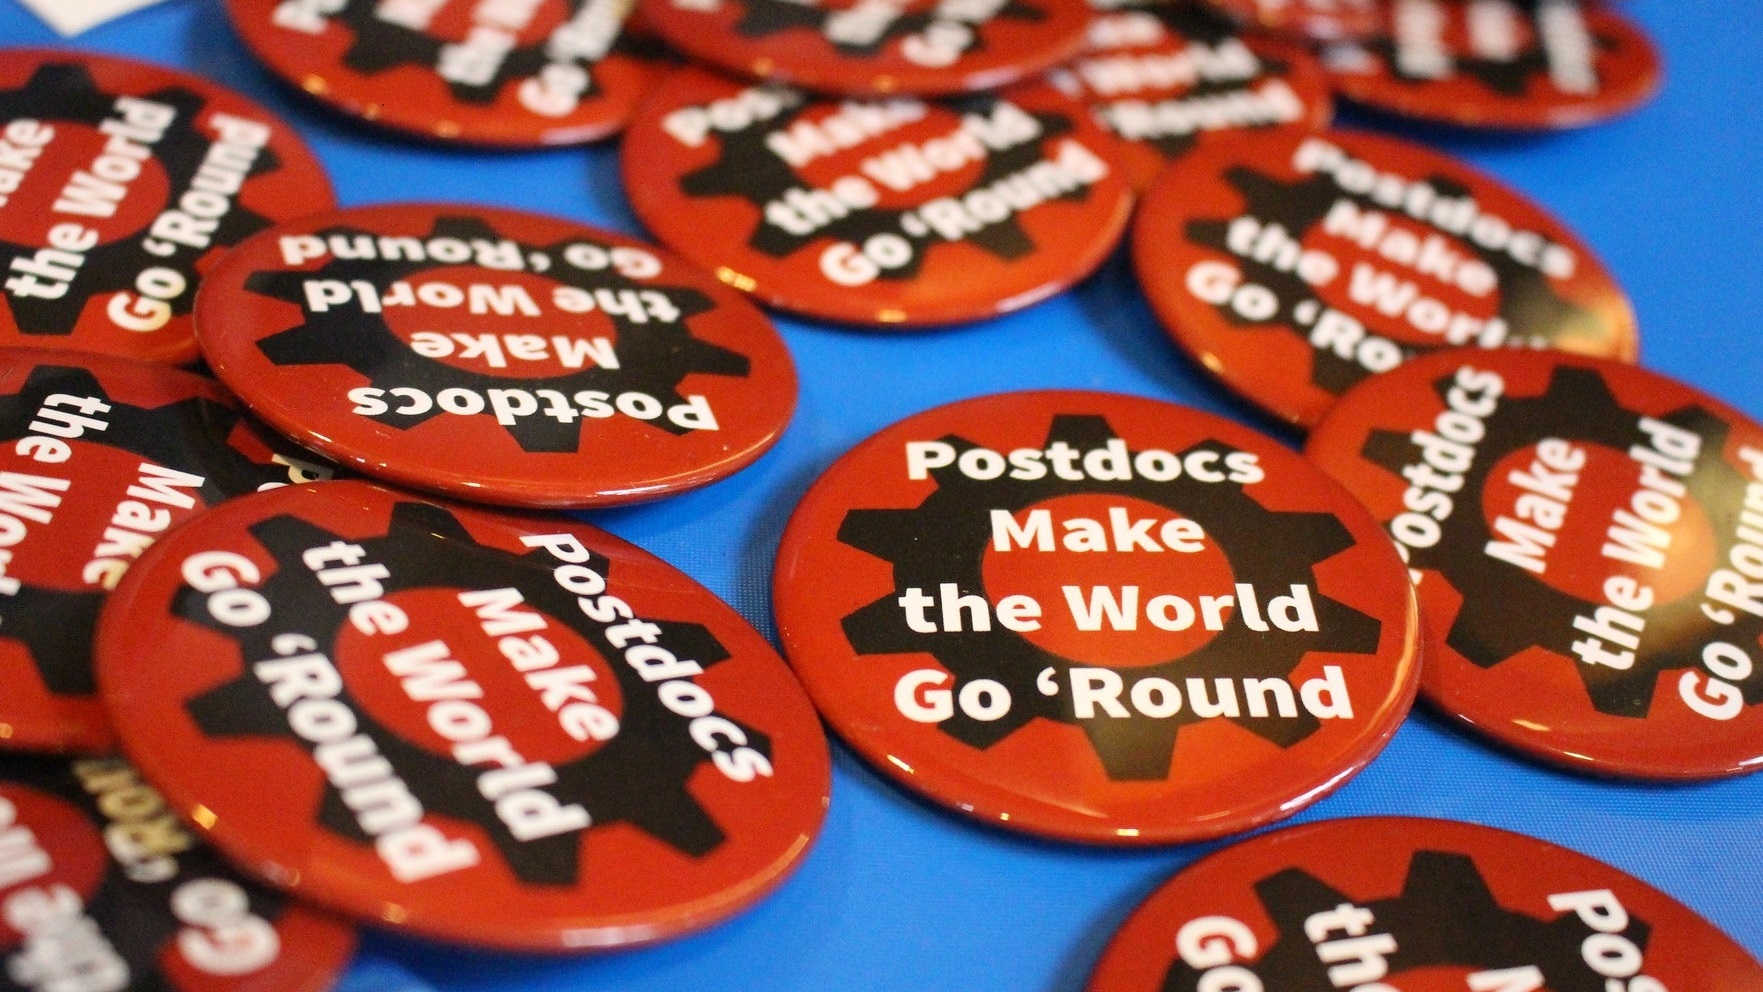 Postdoc Buttons revised